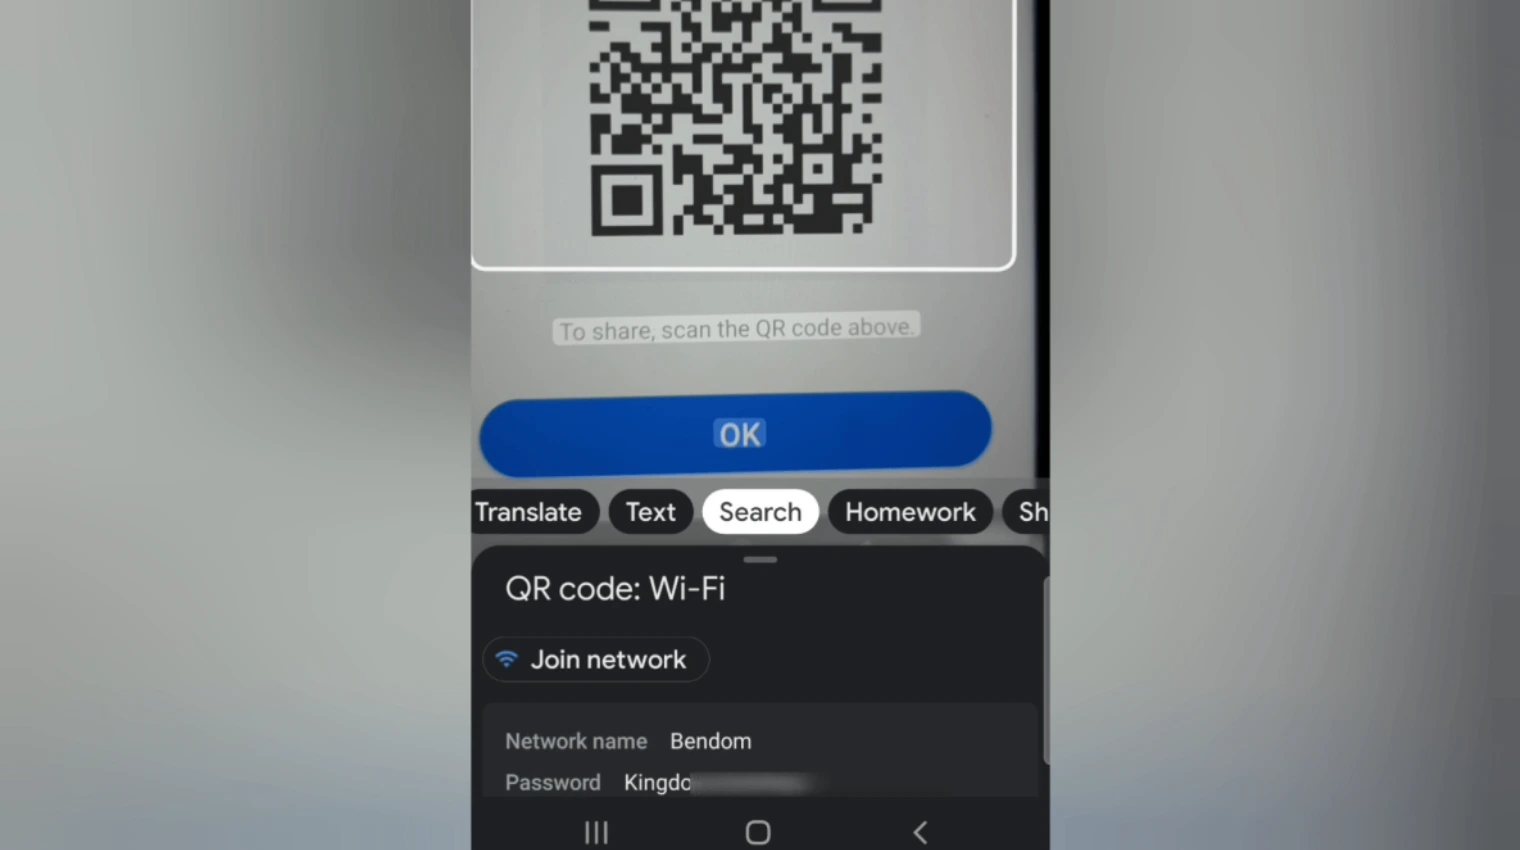 how to get WiFi password from QR code